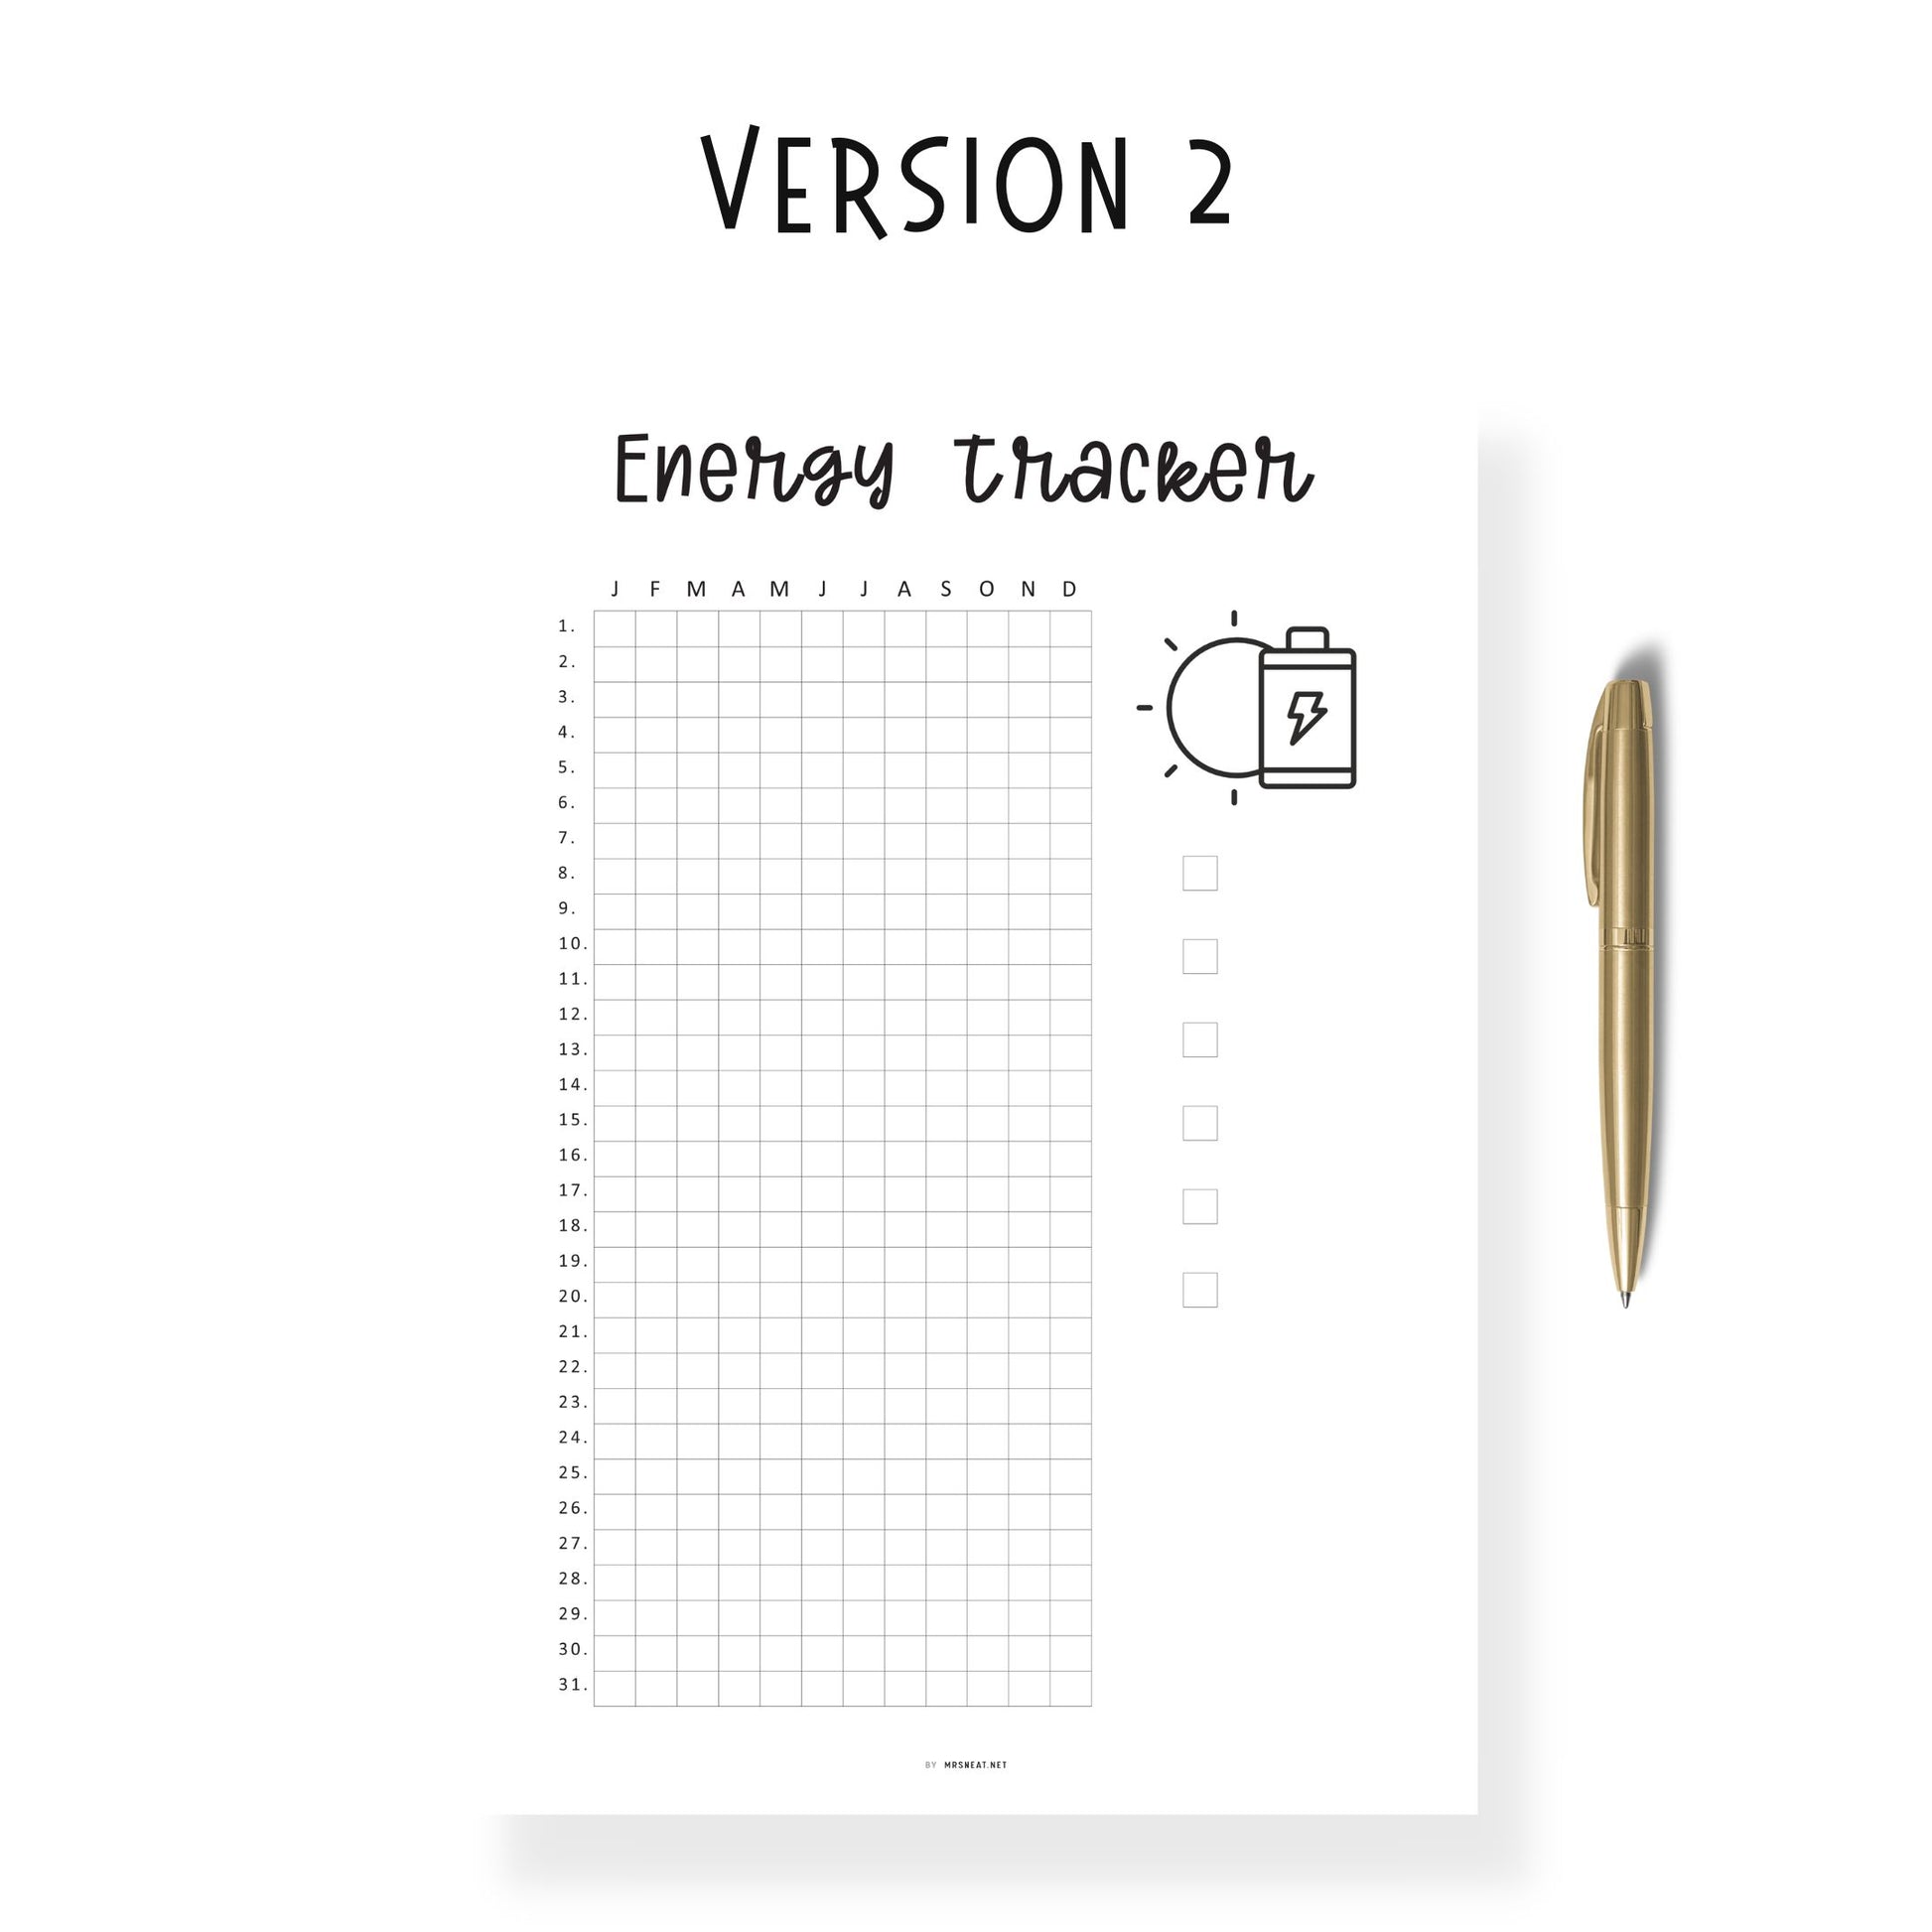 Yearly Energy Tracker Template, Energy Level Template PDF, Mood Tracker, Health Journal, Health Log, Health Tracker Template, A4, A5, Letter, Half Letter, PDF, 2 versions